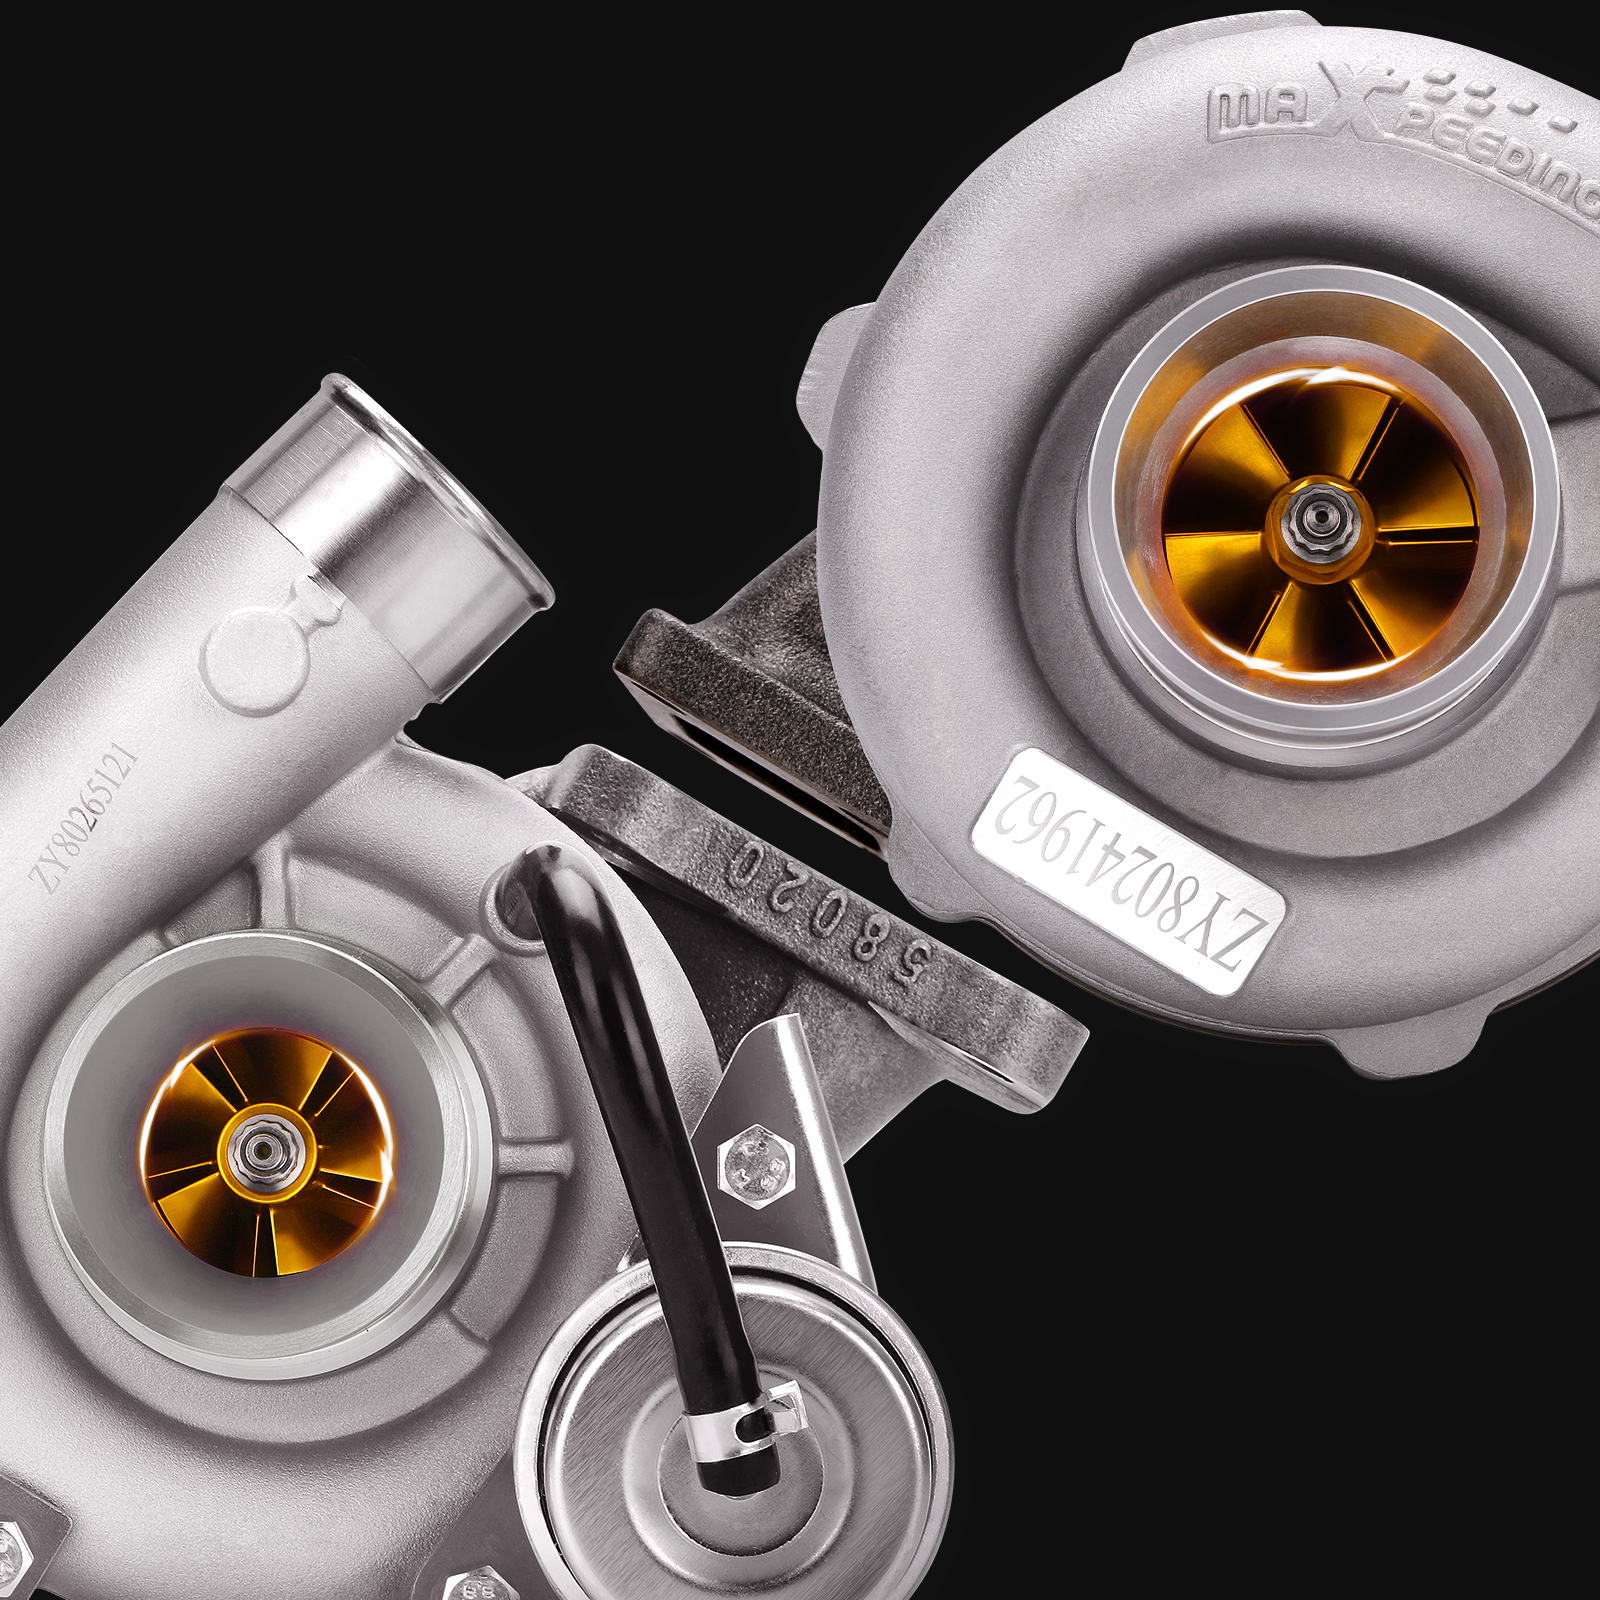 MaXpeedingRods Blog | An Automotive Blog from MaXpeedingRods - How to choose a right Turbo for your car